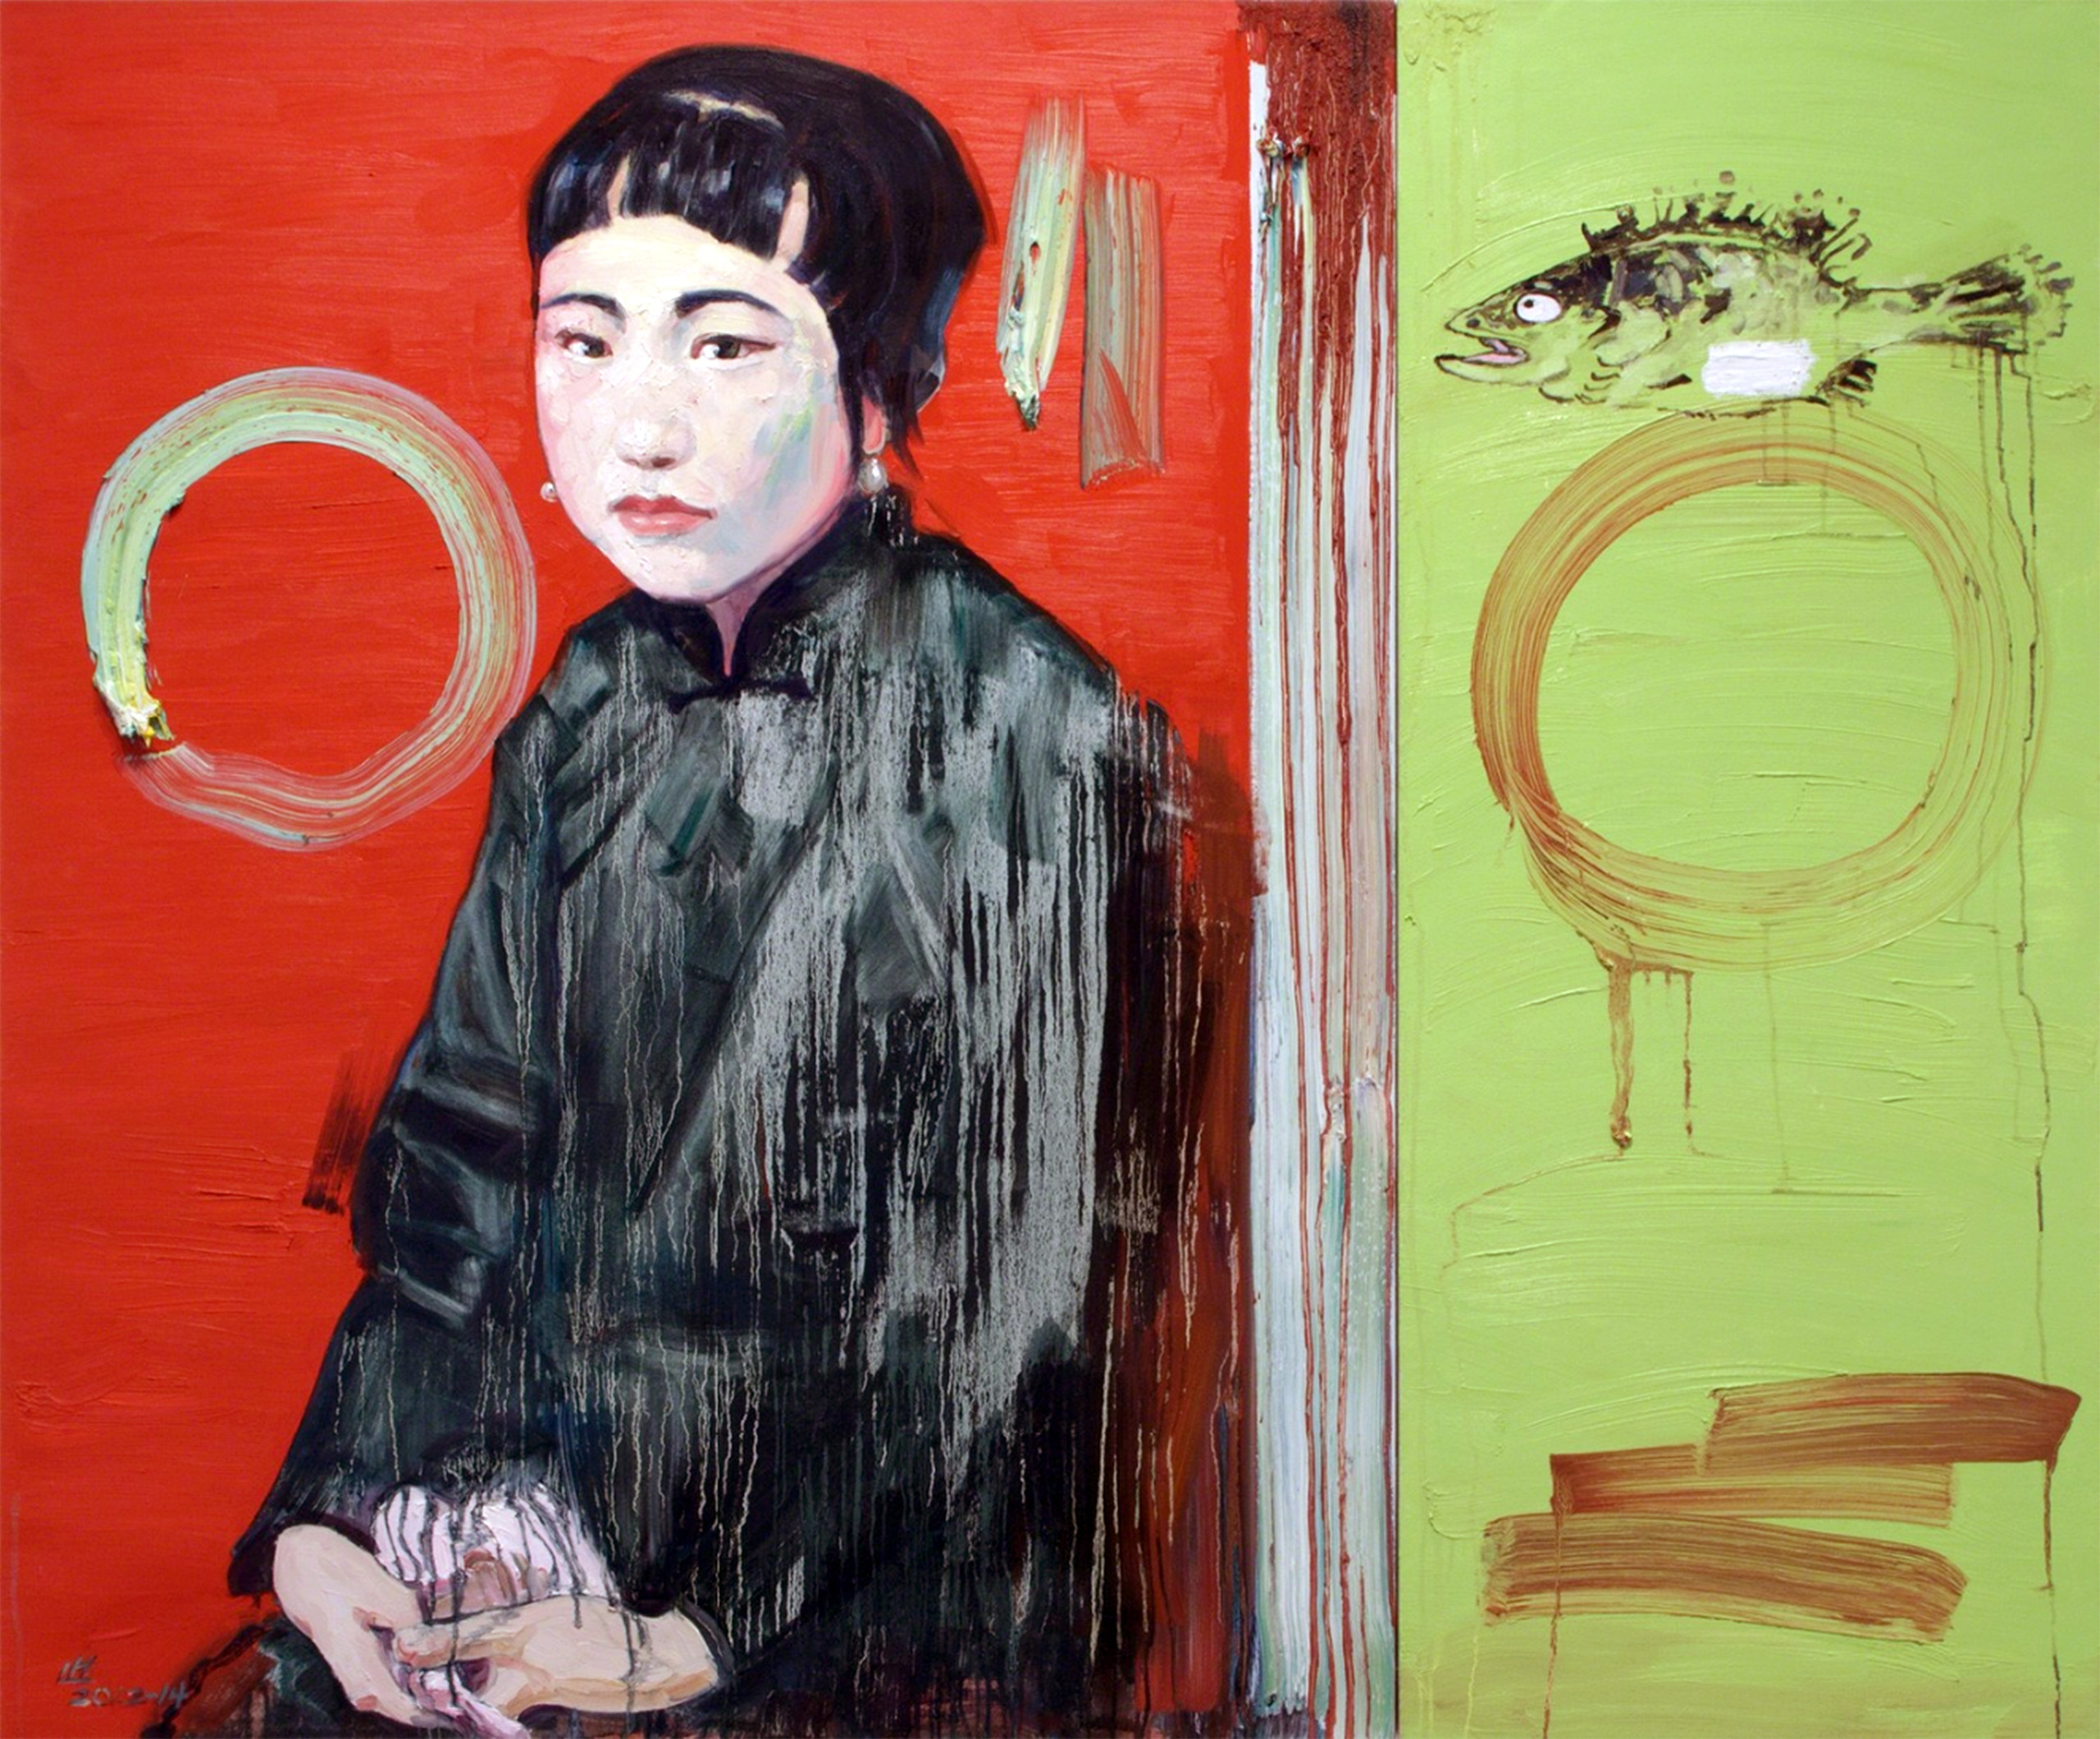 A painting of a light-skinned woman of Asian descent atop complementary colors of orange-red next to lime green. The shorthaired woman holds a pink handkerchief. To her right is a sad looking fish.